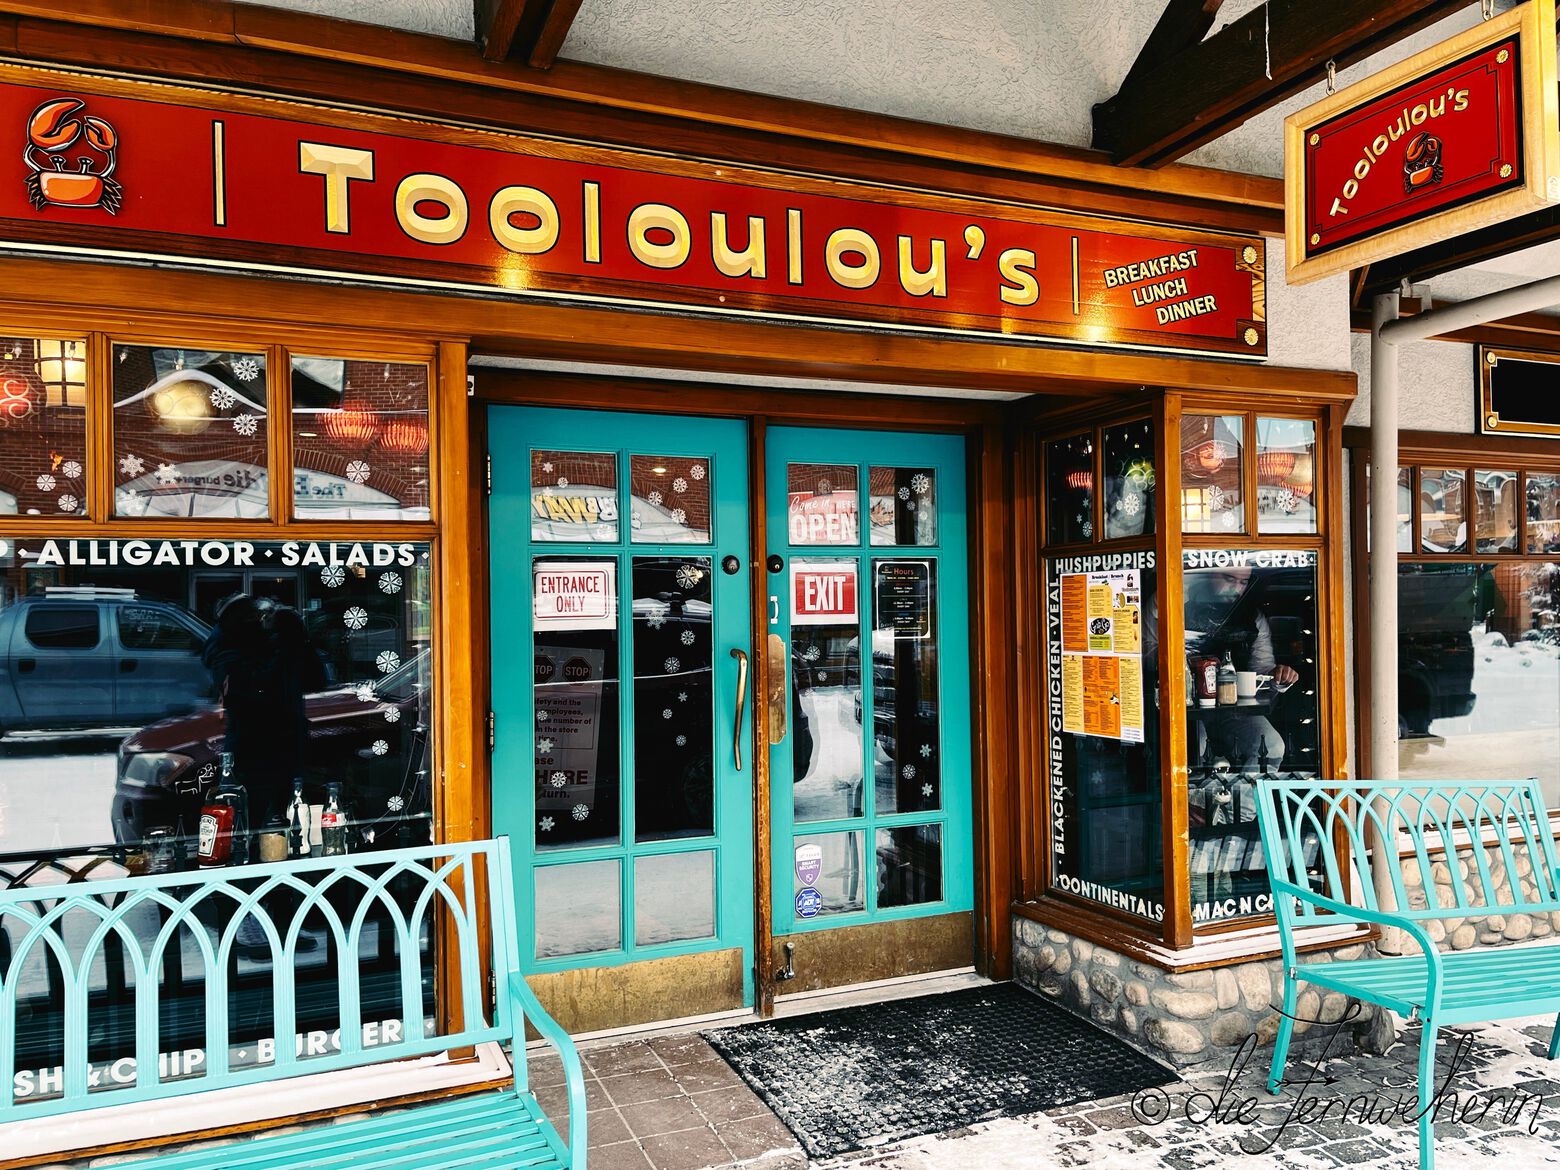 Exterior view of Tooloulou's, a restaurant in the town of Banff.